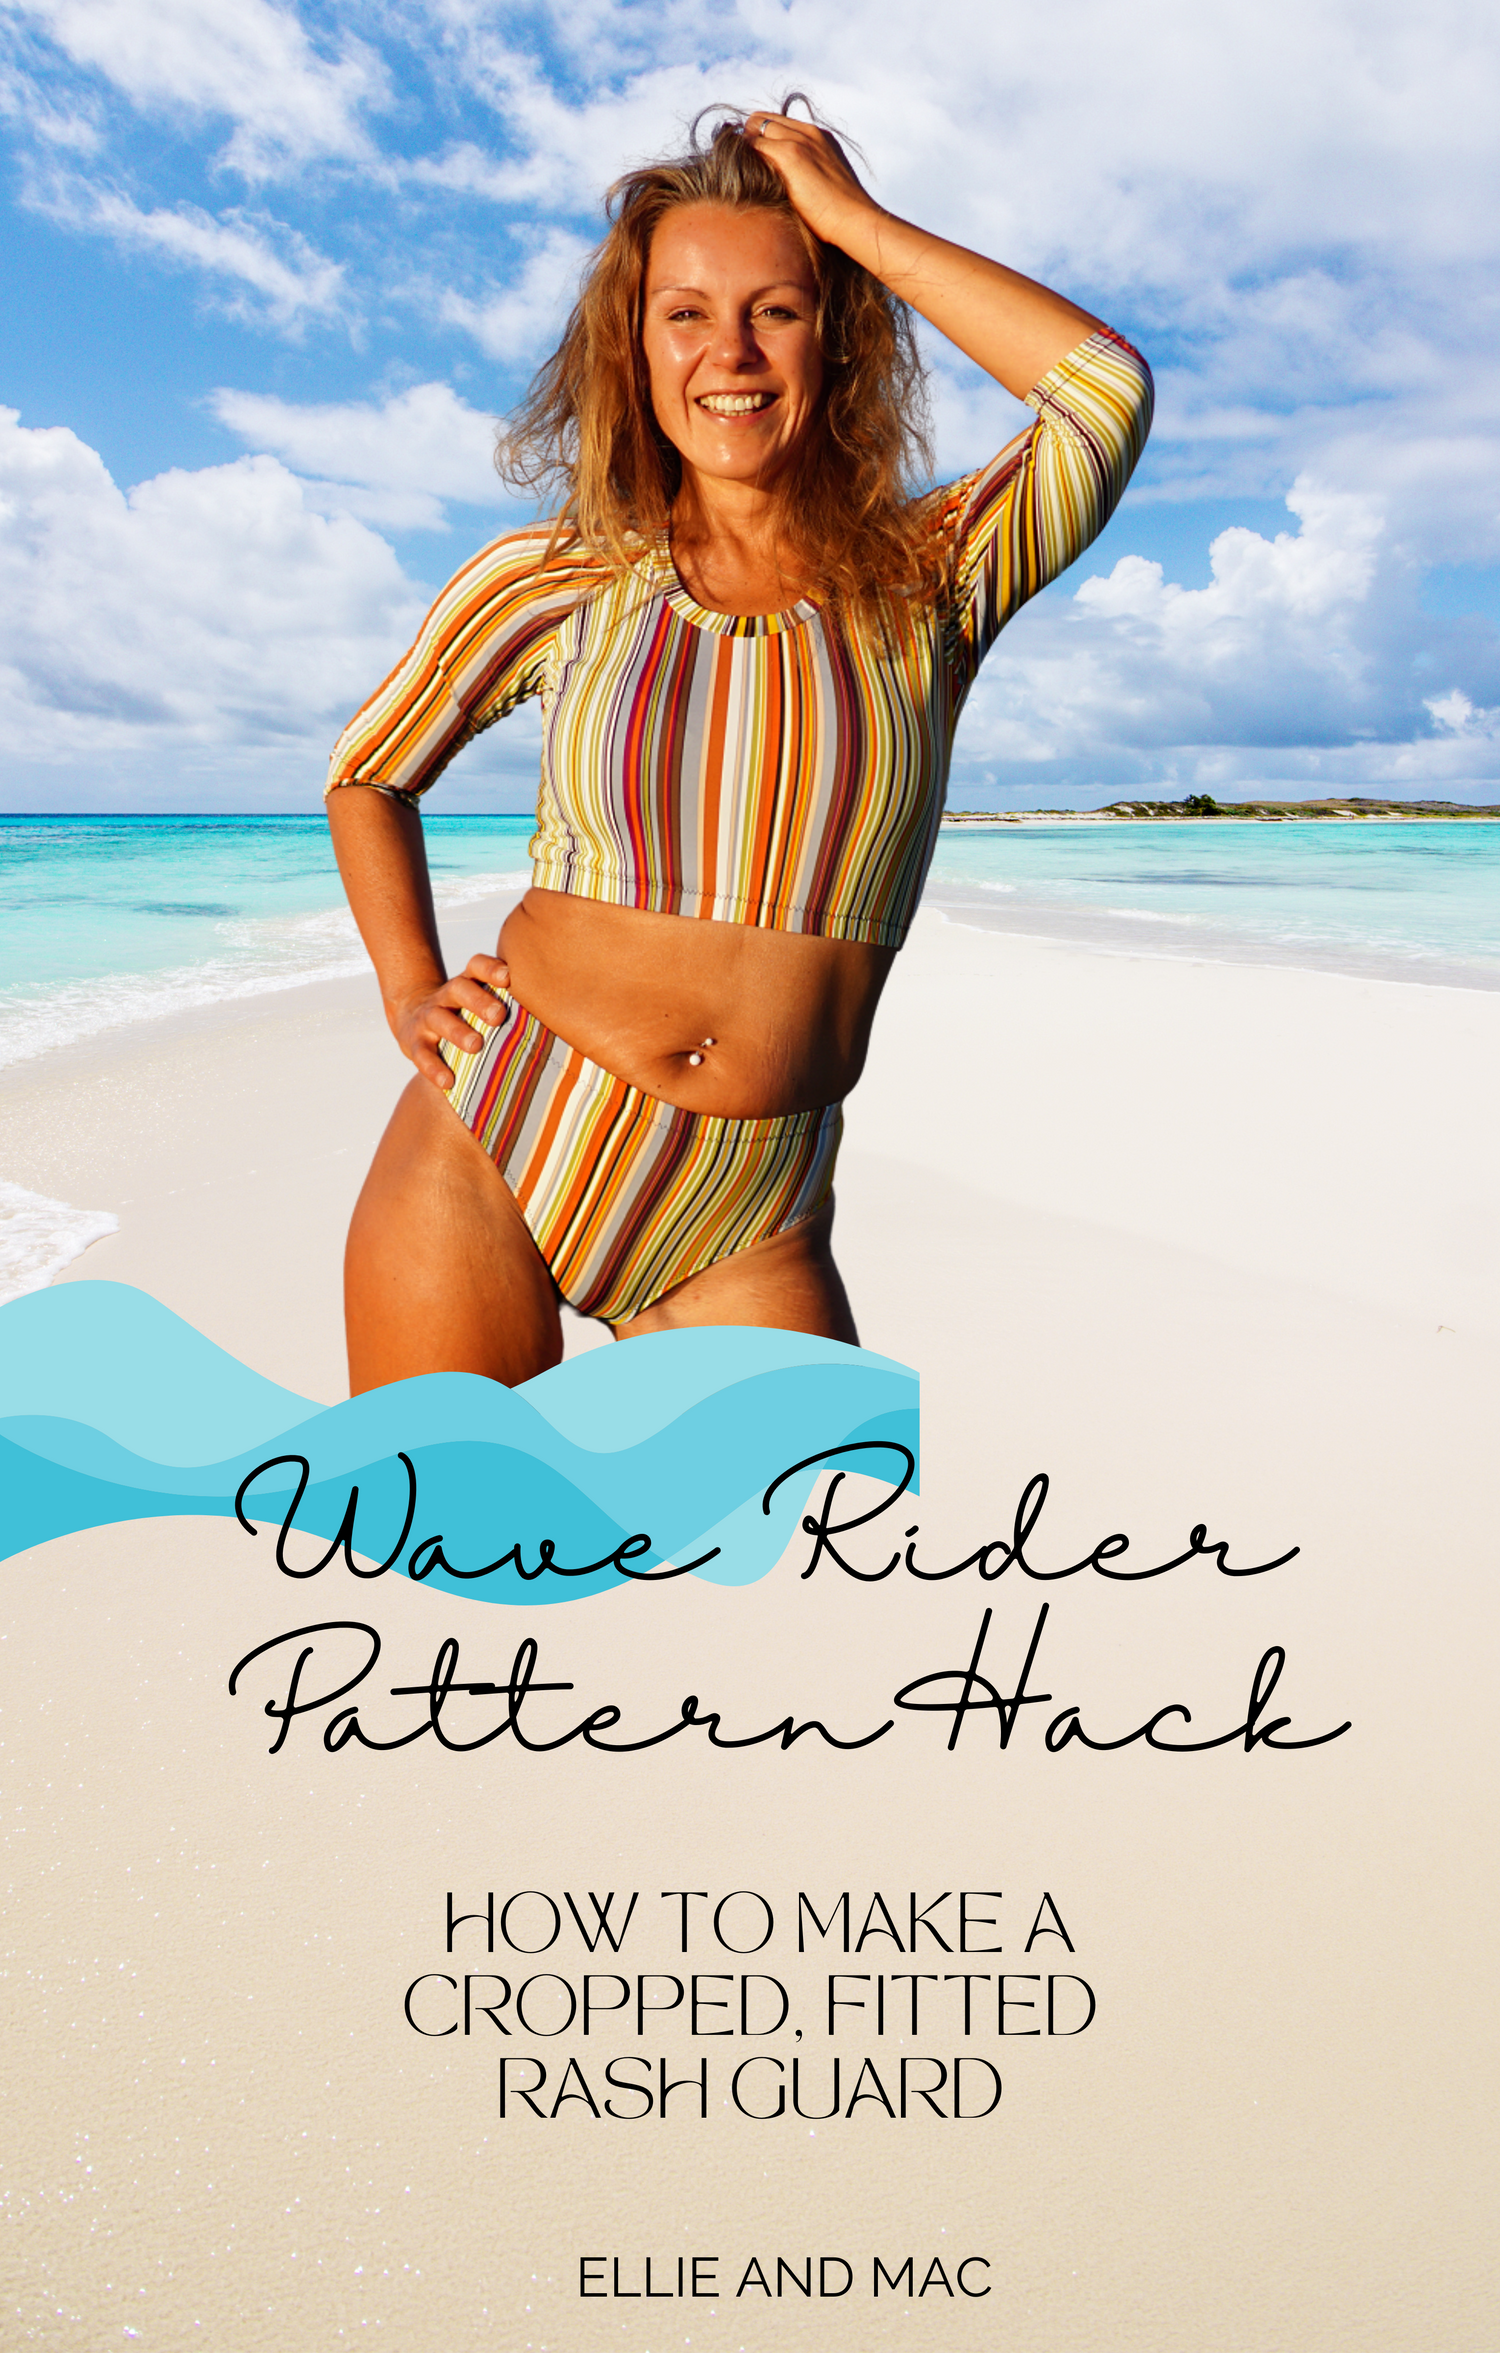 Wave Rider Hack: How to Make a Cropped, Fitted Rash Guard